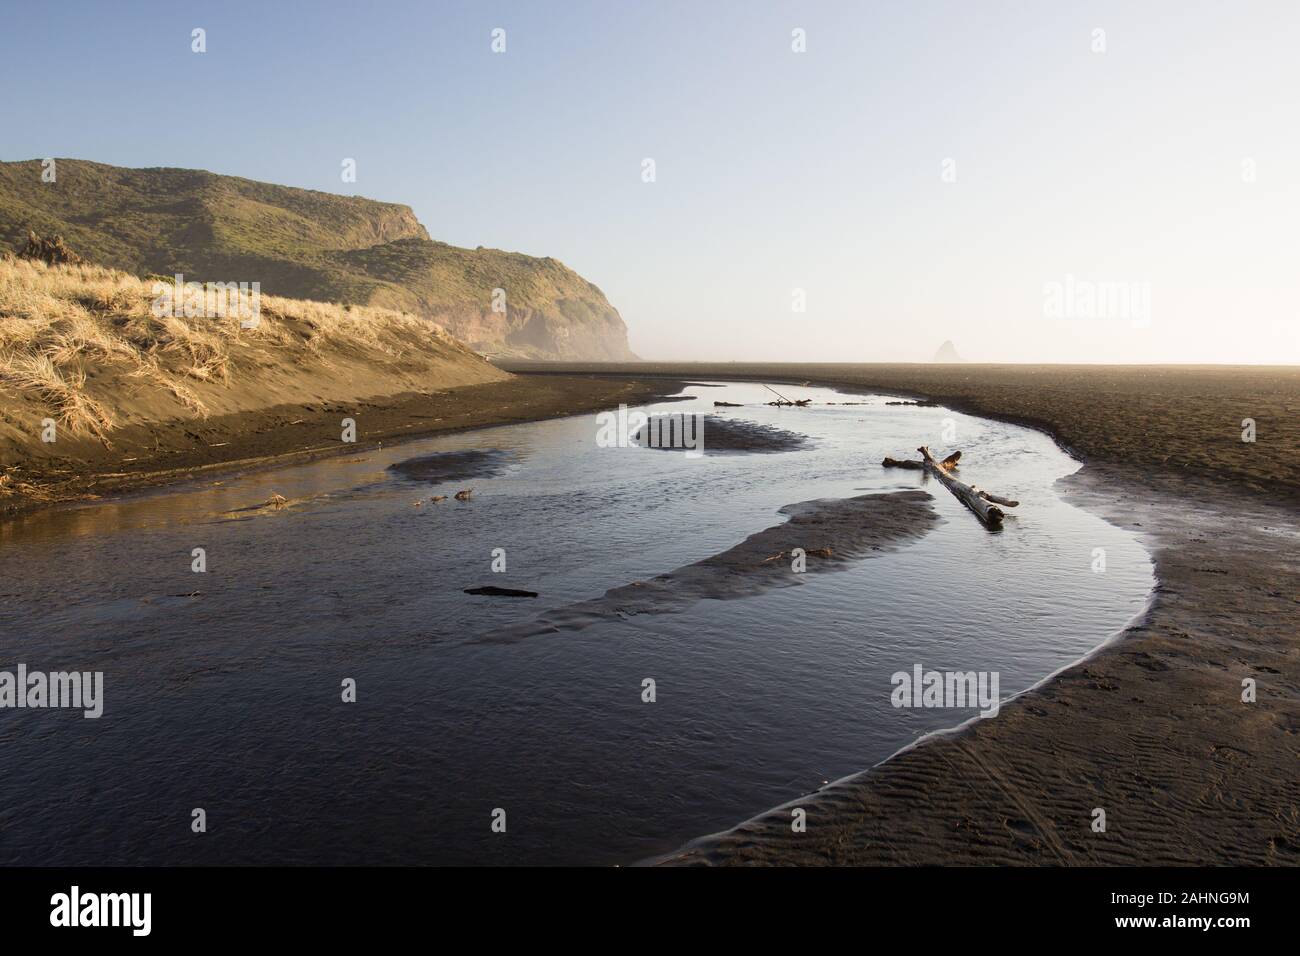 The river, black sand, dunes and mountains of Karekare Beach in West Auckland, New Zealand. Stock Photo